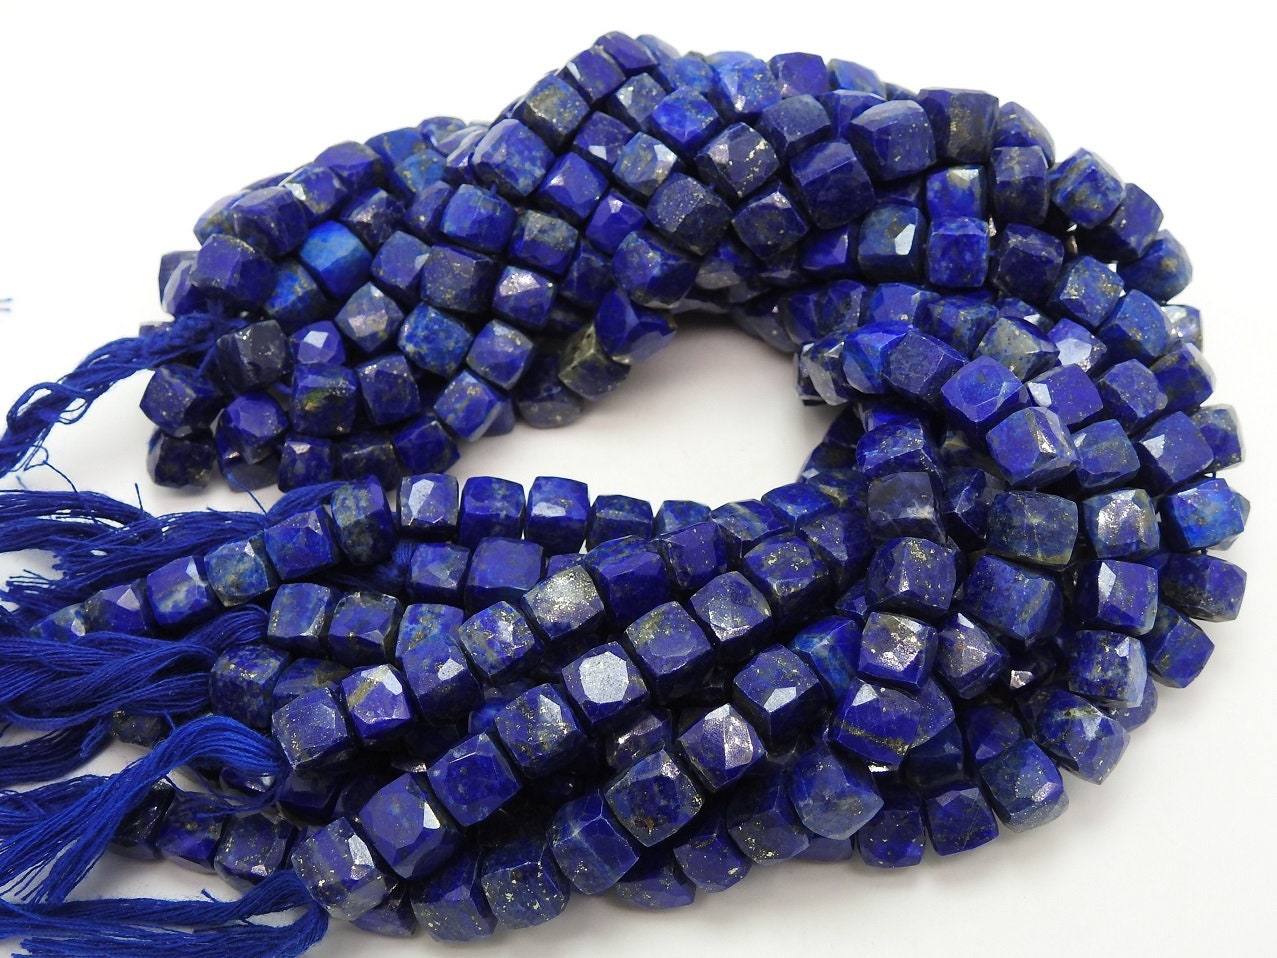 Lapis Lazuli Faceted Cube,Box,Cuboid Shape Beads,10Inch Strand 7X8MM Approx,Wholesaler,Supplies,100%Natural PME-CB2 | Save 33% - Rajasthan Living 19